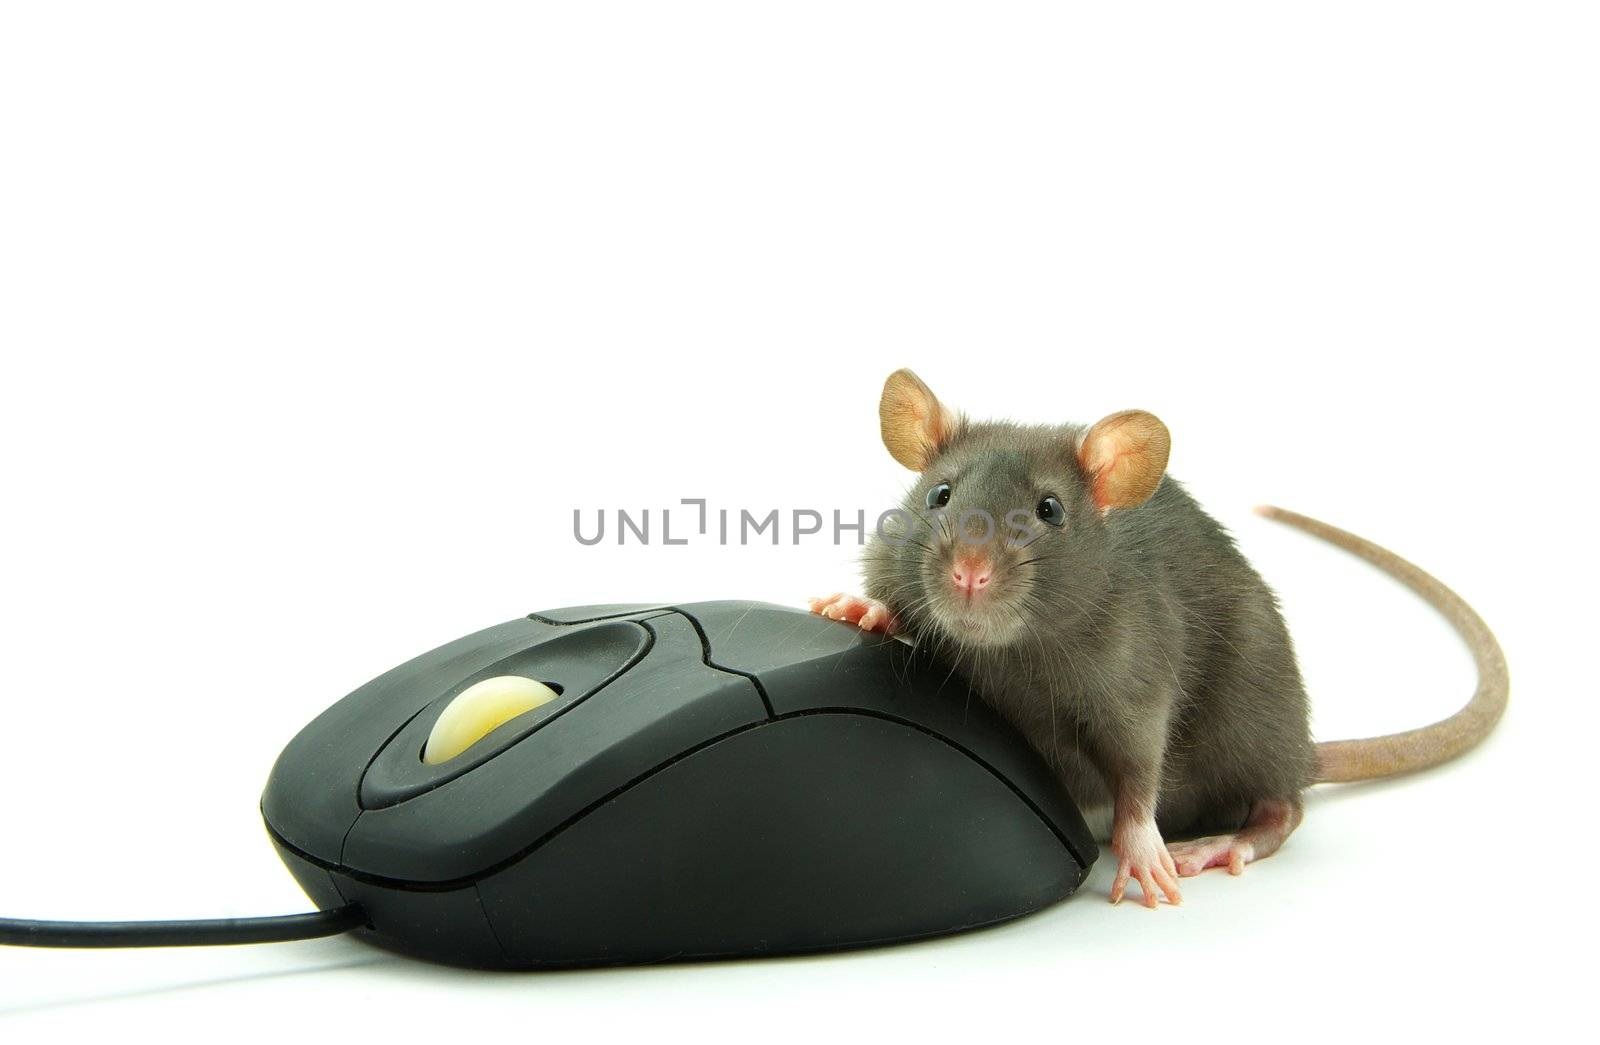 Rat and a computer mouse on white background